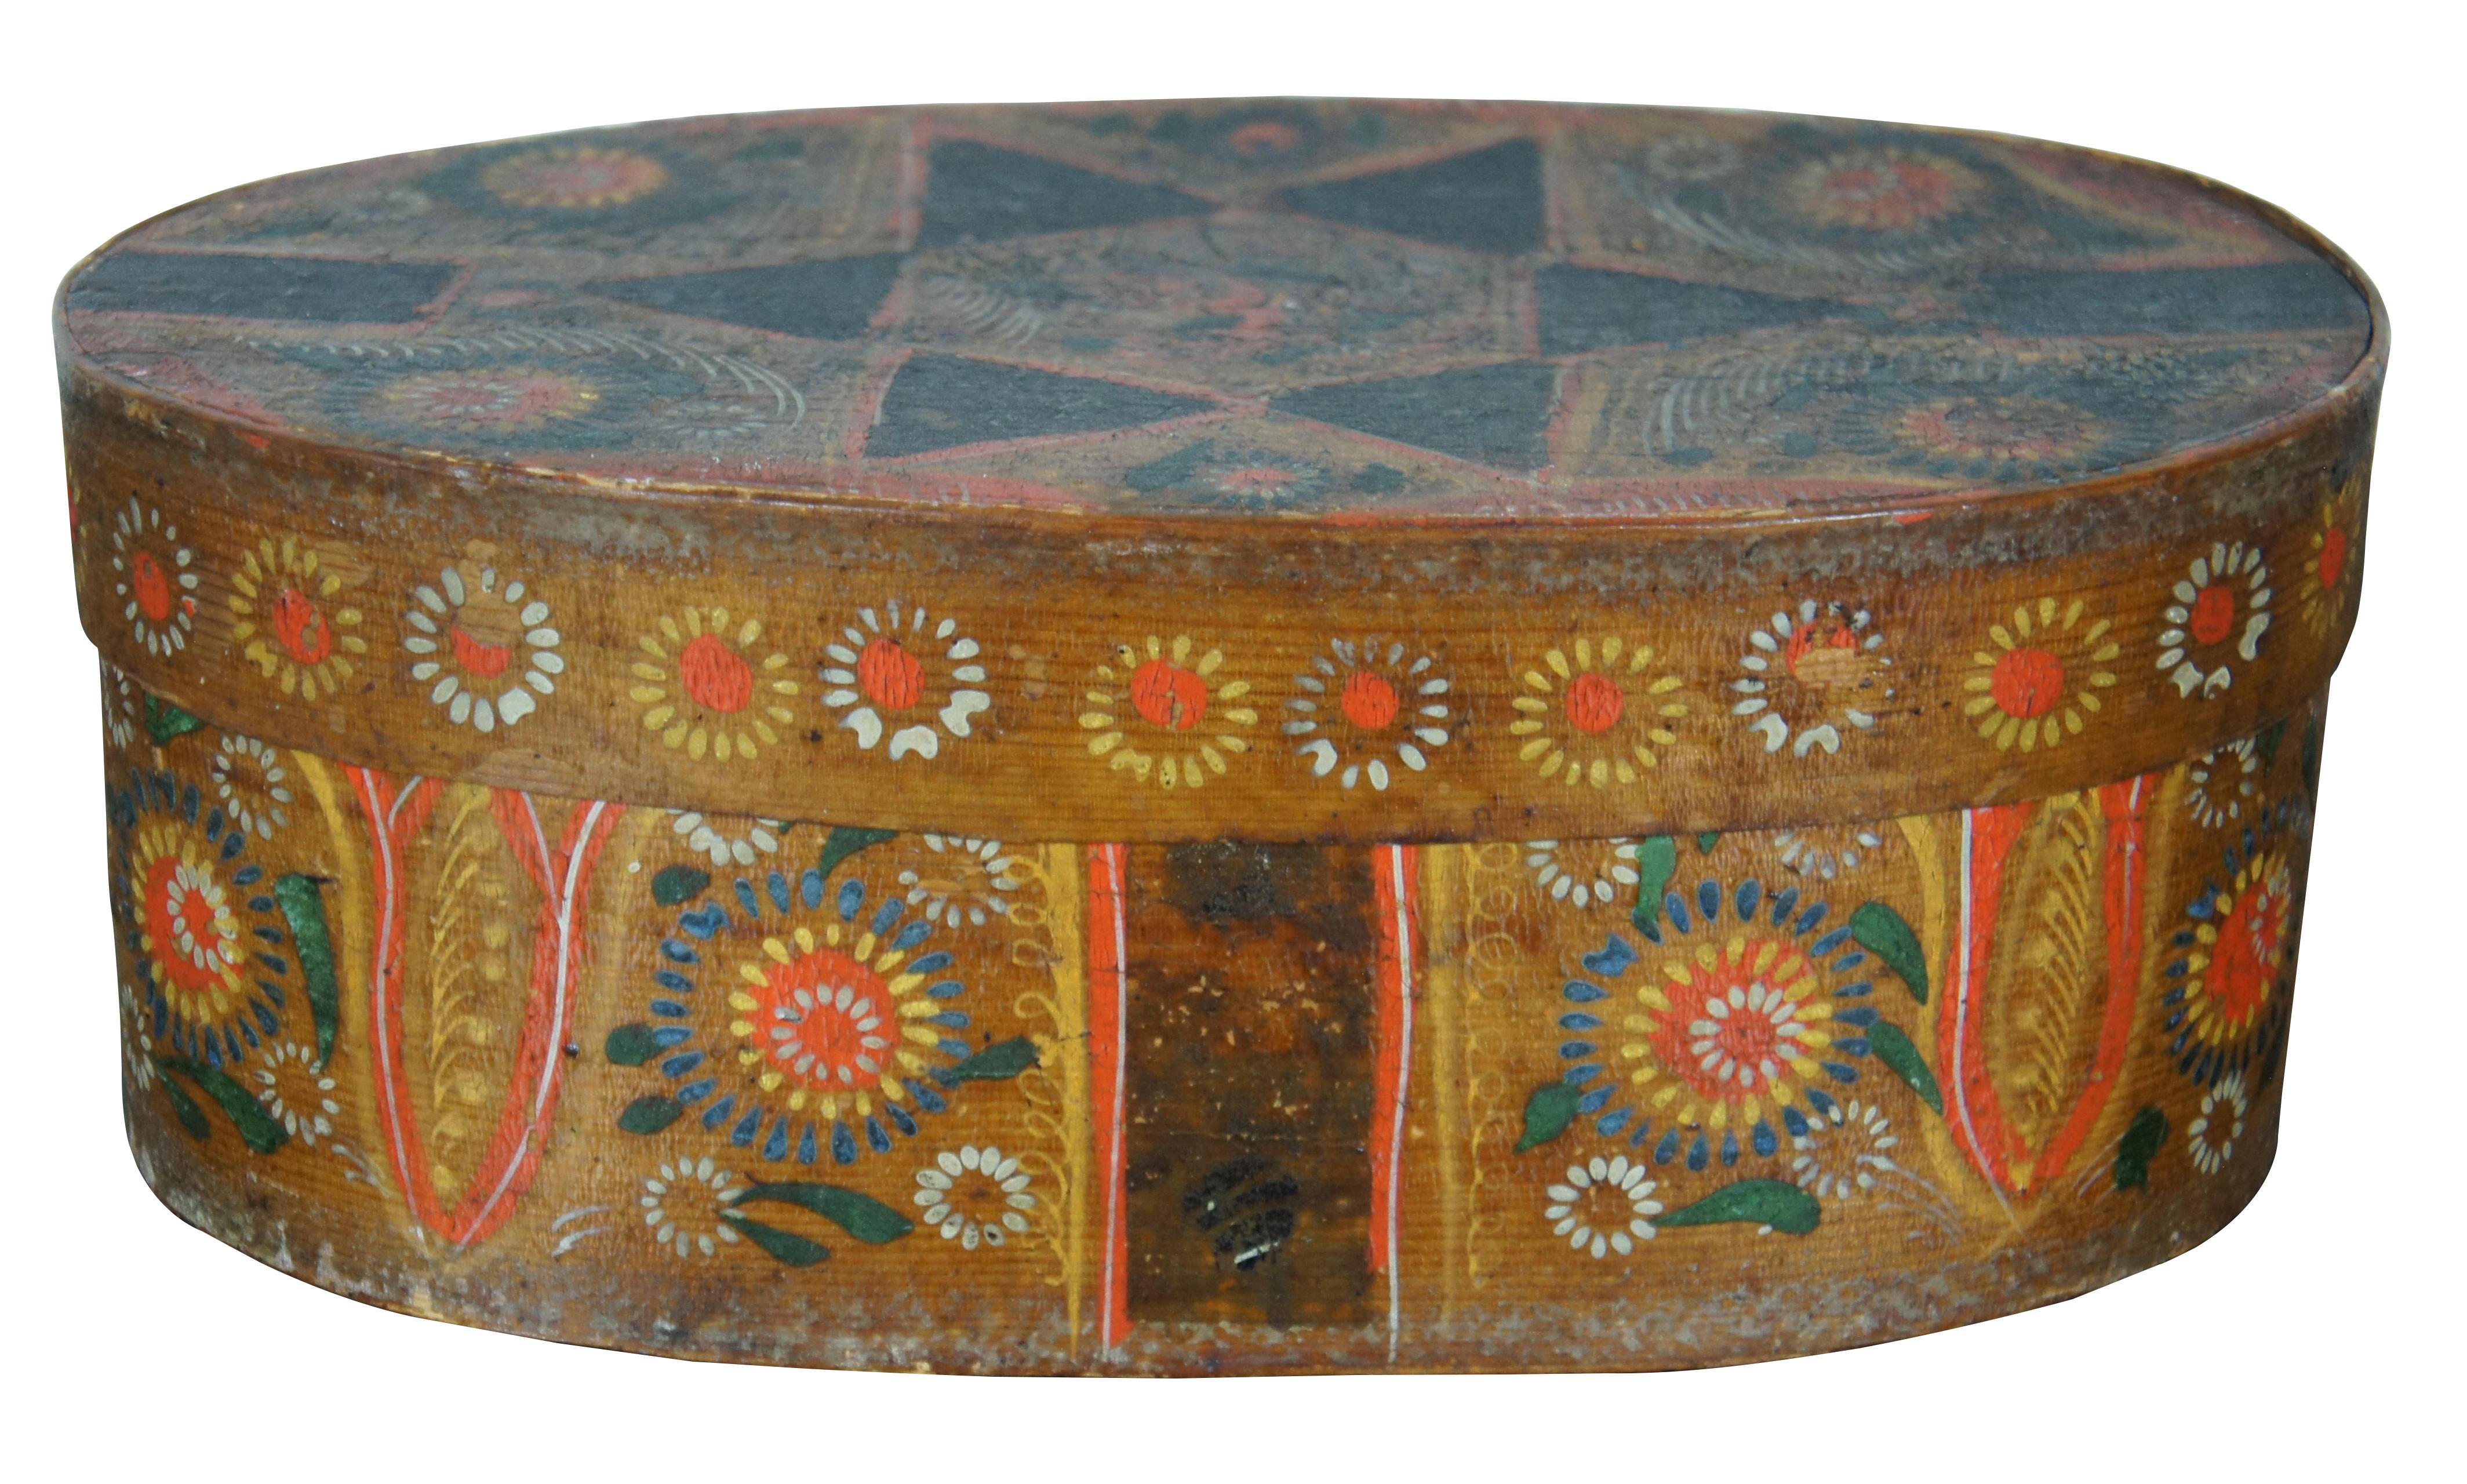 Antique 19th century German or Pennsylvania Dutch folk art Bride’s Box, crafted of bentwood and hand painted with floral and star motifs. Measure: 11